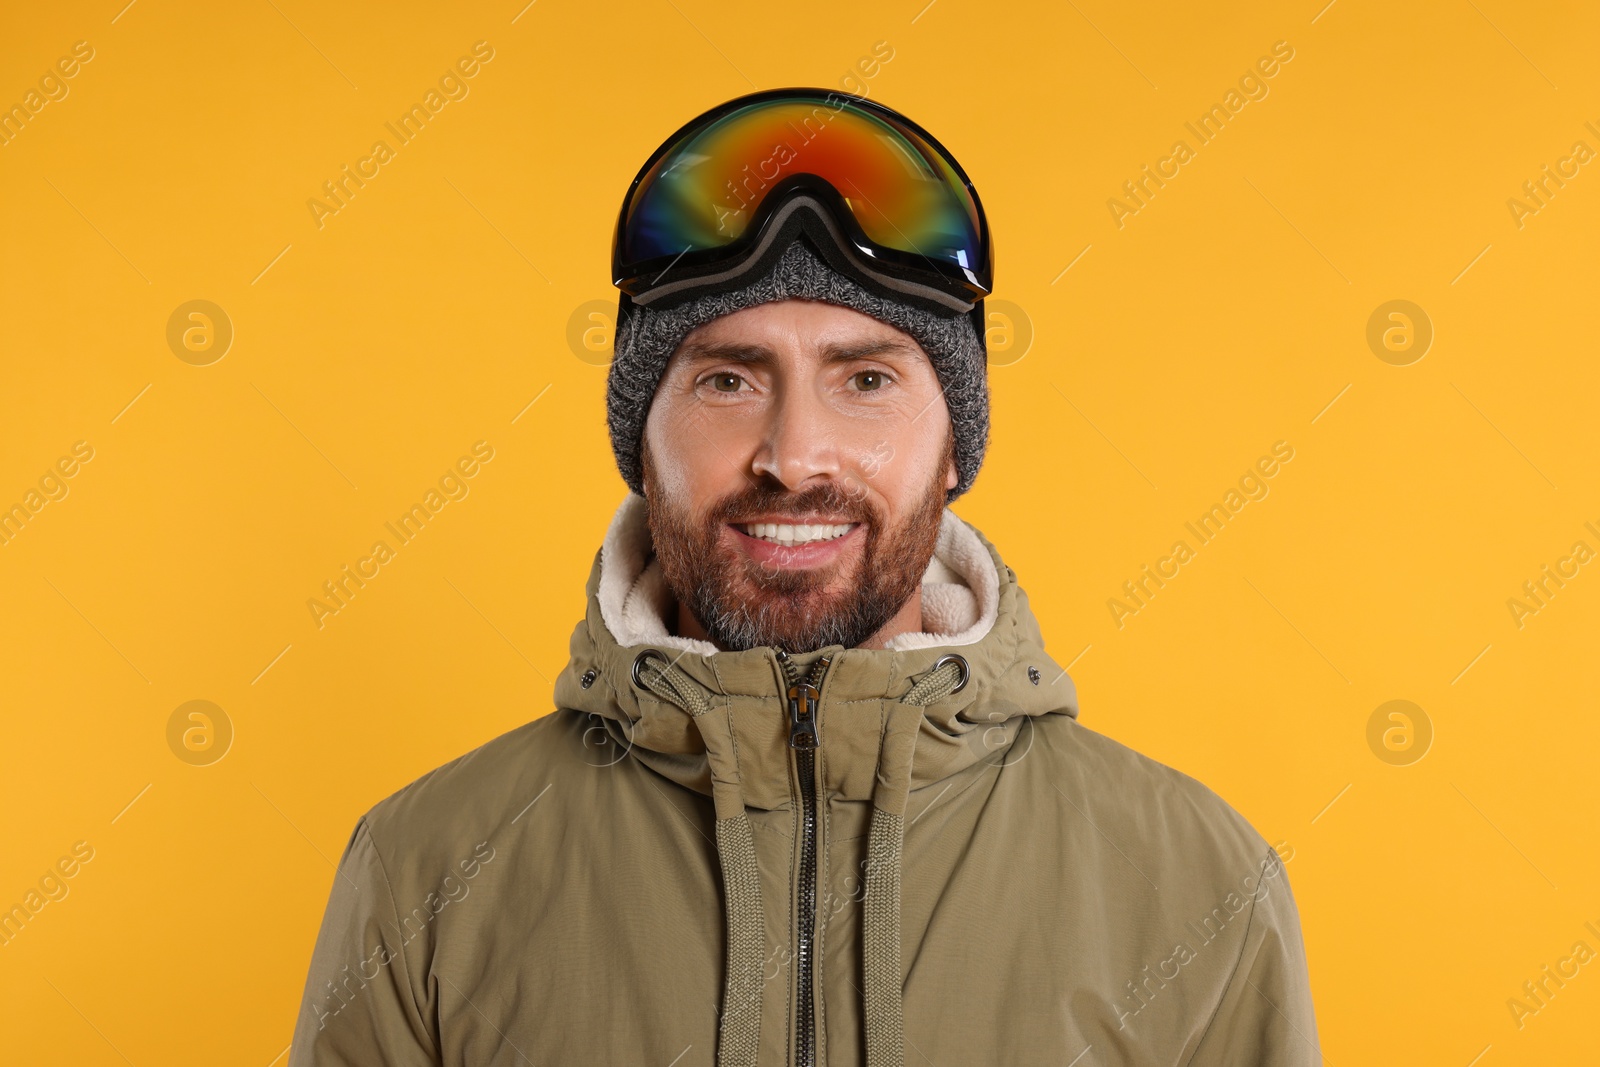 Photo of Winter sports. Happy man in ski suit and goggles on orange background